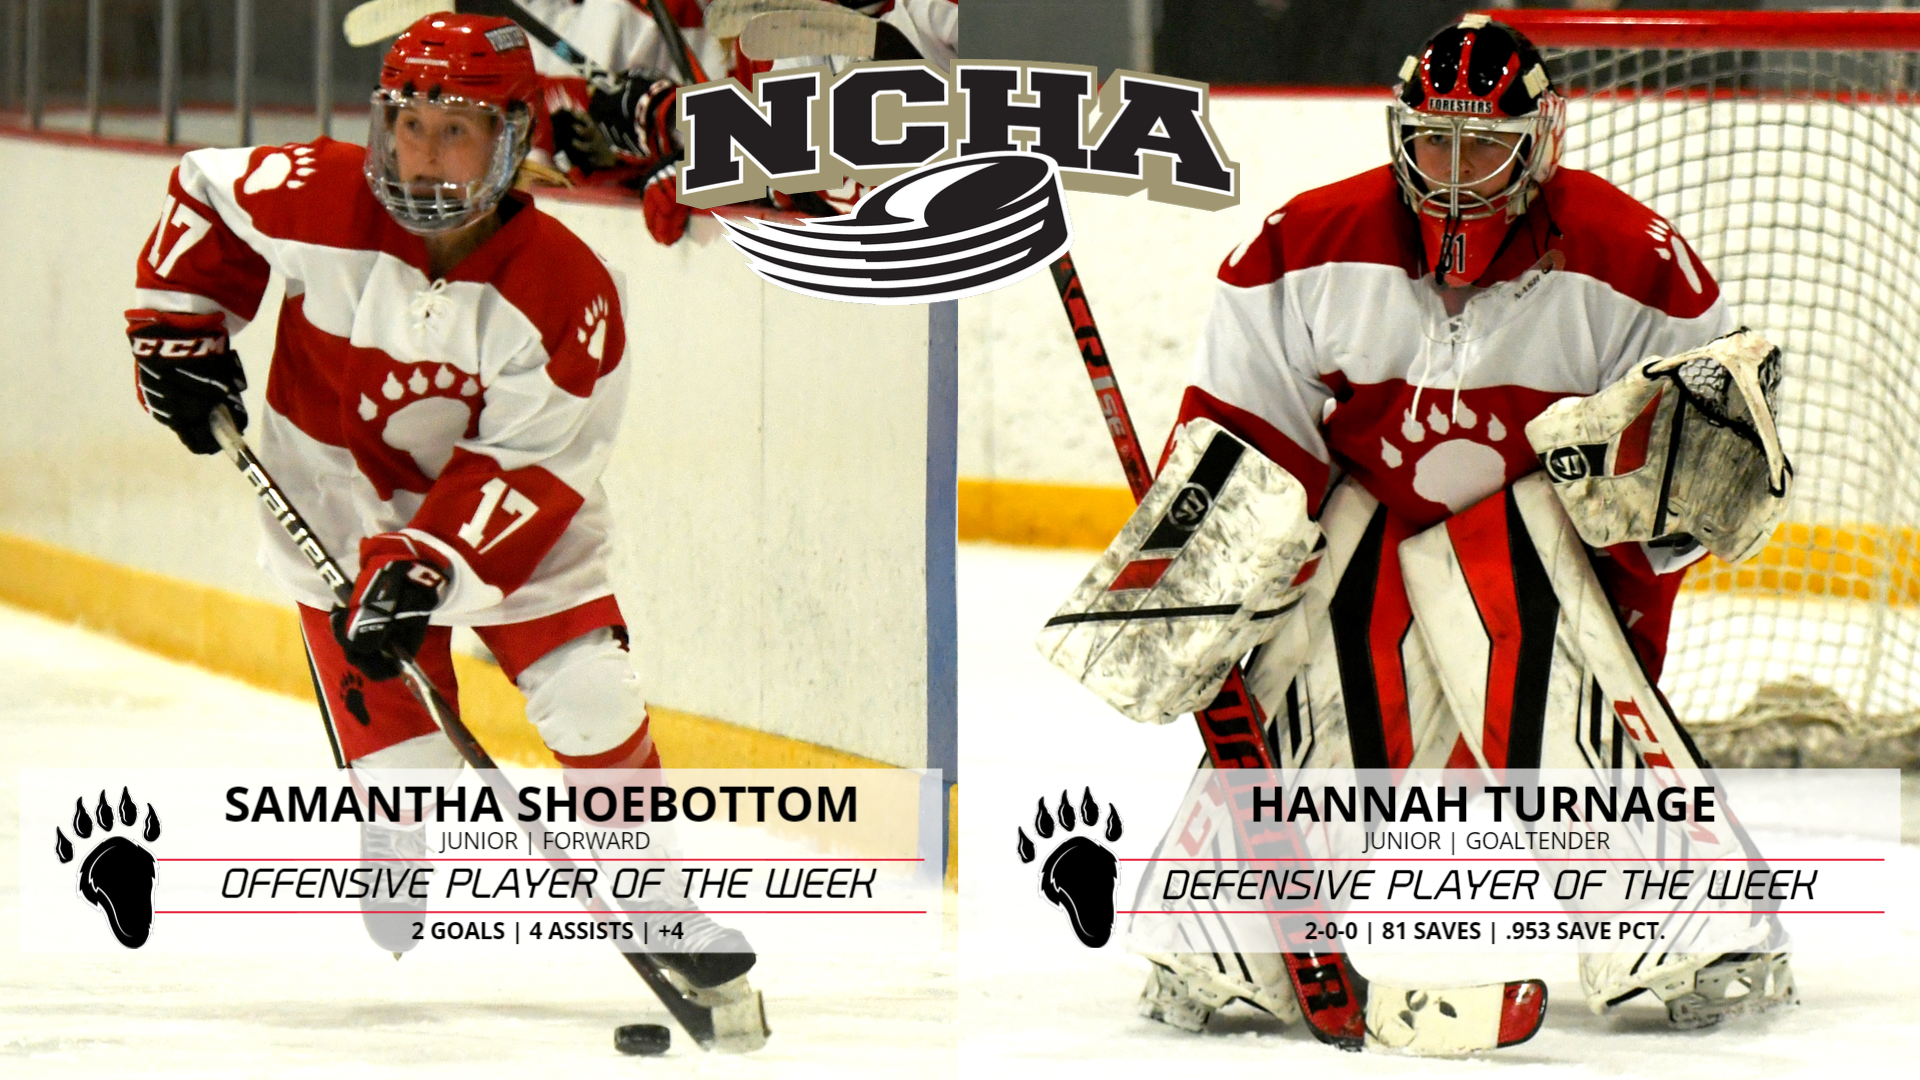 Shoebottom and Turnage Named NCHA Players of the Week